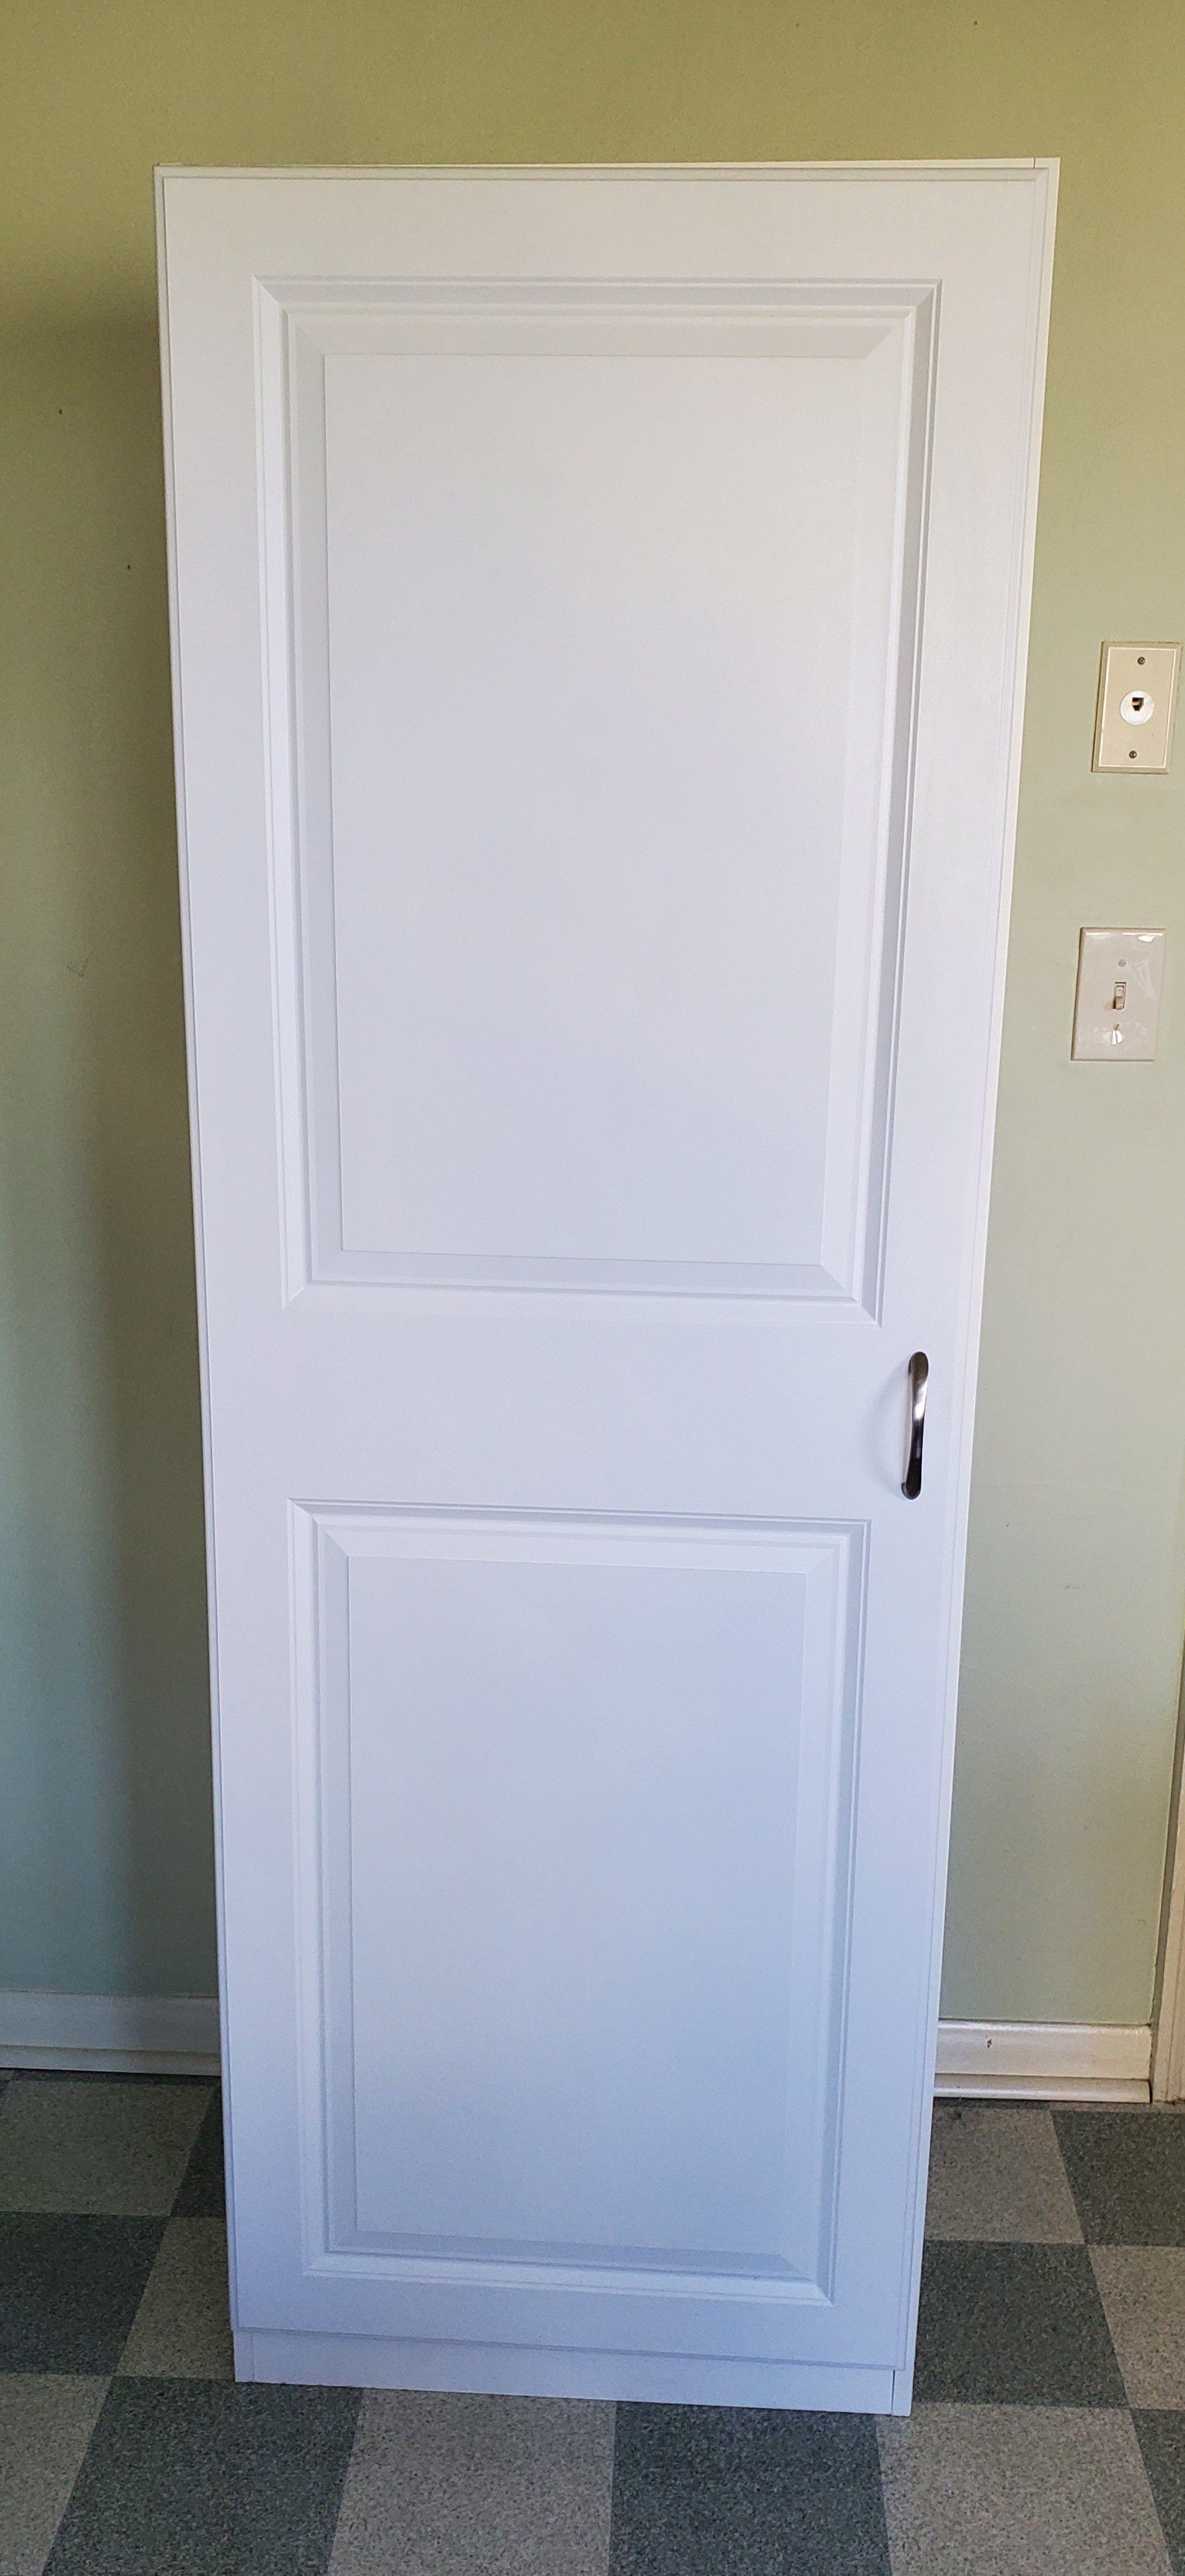 Freestanding white single door cabinet pantry 16.5 inches deep 23.75 inches wide 70 inches tall